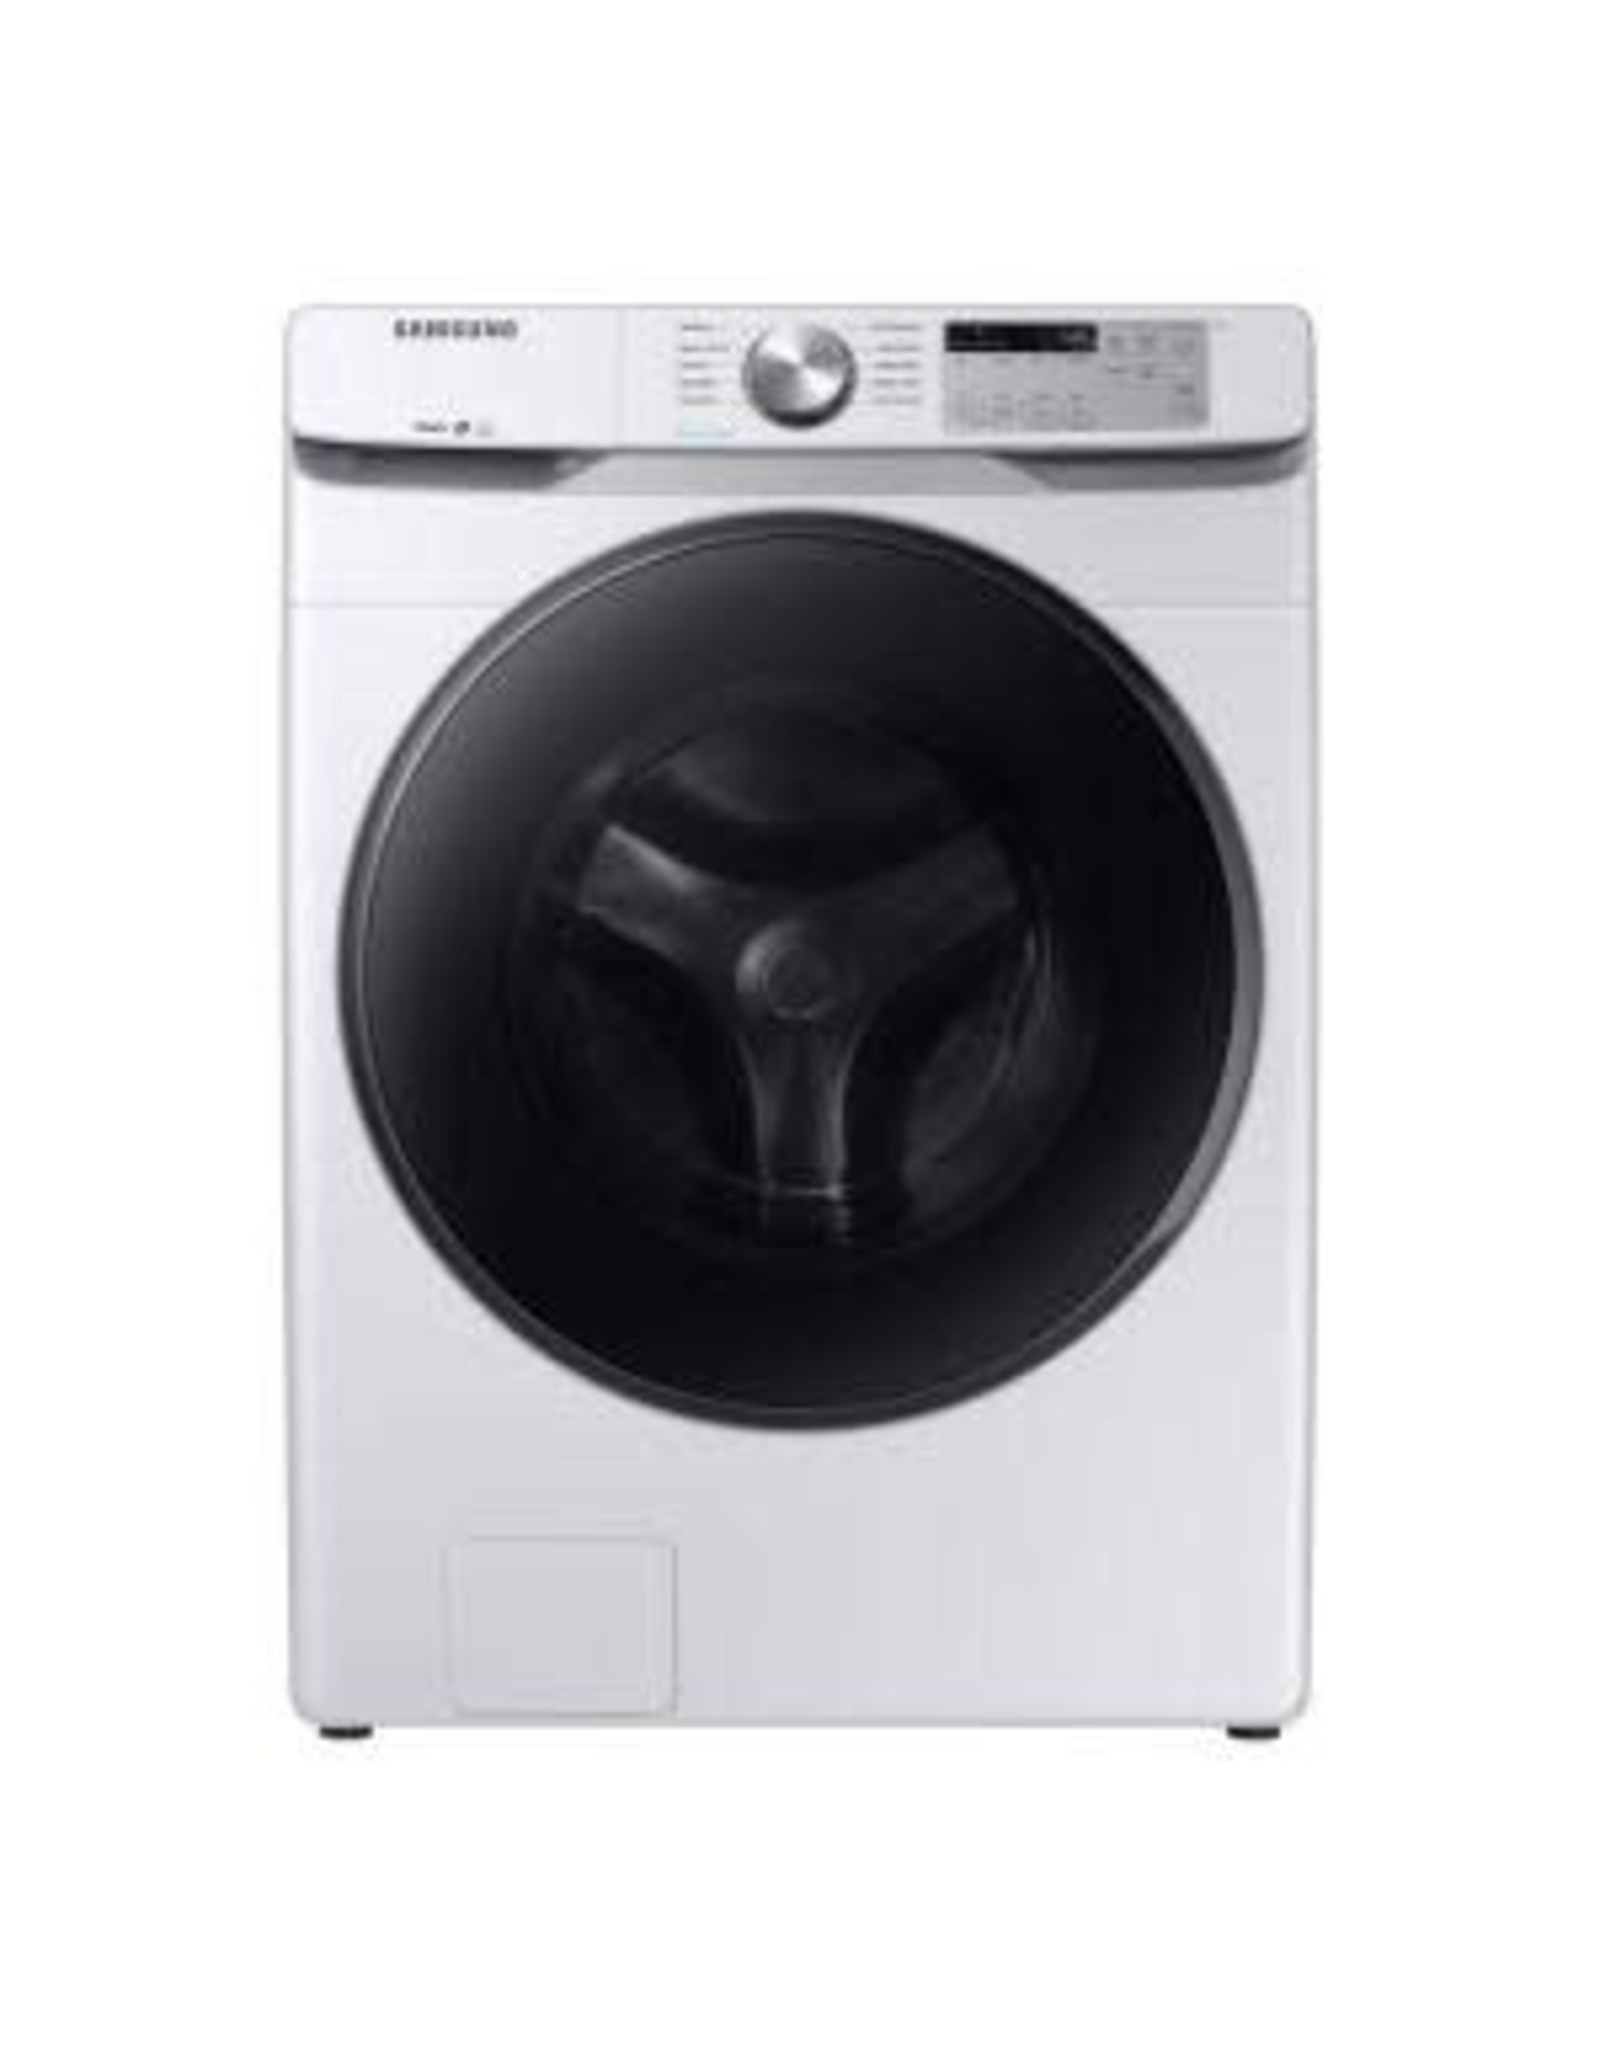 SAMSUNG NEW WF45R6100AW  4.5 cu. ft. High-Efficiency White Front Load Washing Machine with Steam, ENERGY STAR